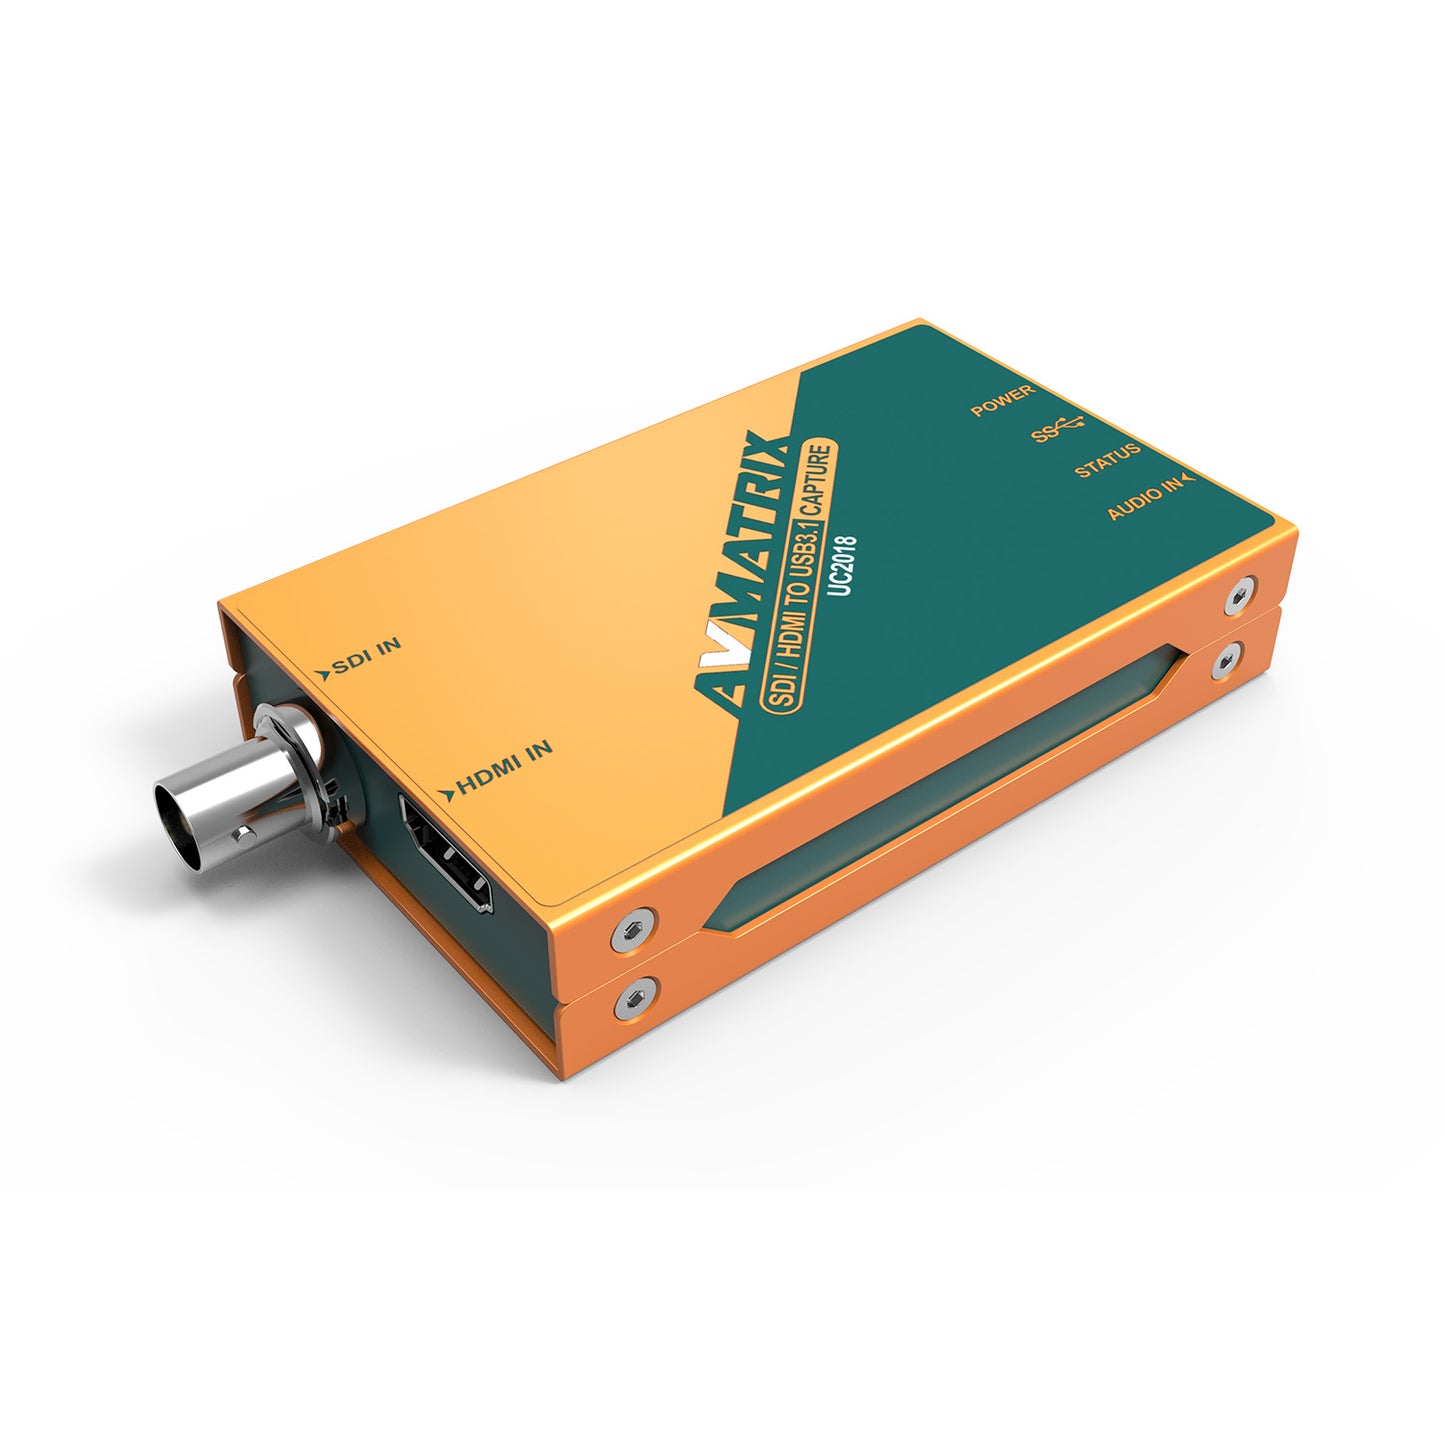 AVMatrix Uncompressed Video Capture UC1118 SDI / UC1218 HDMI / UC2018 HDMI/SDI to USB3.1 Type C with Auto Input Signal Detection, Up to 1080p60, Rate Up to 200MB/s via USB 3.1 Gen1 for Windows, Linux, macOS